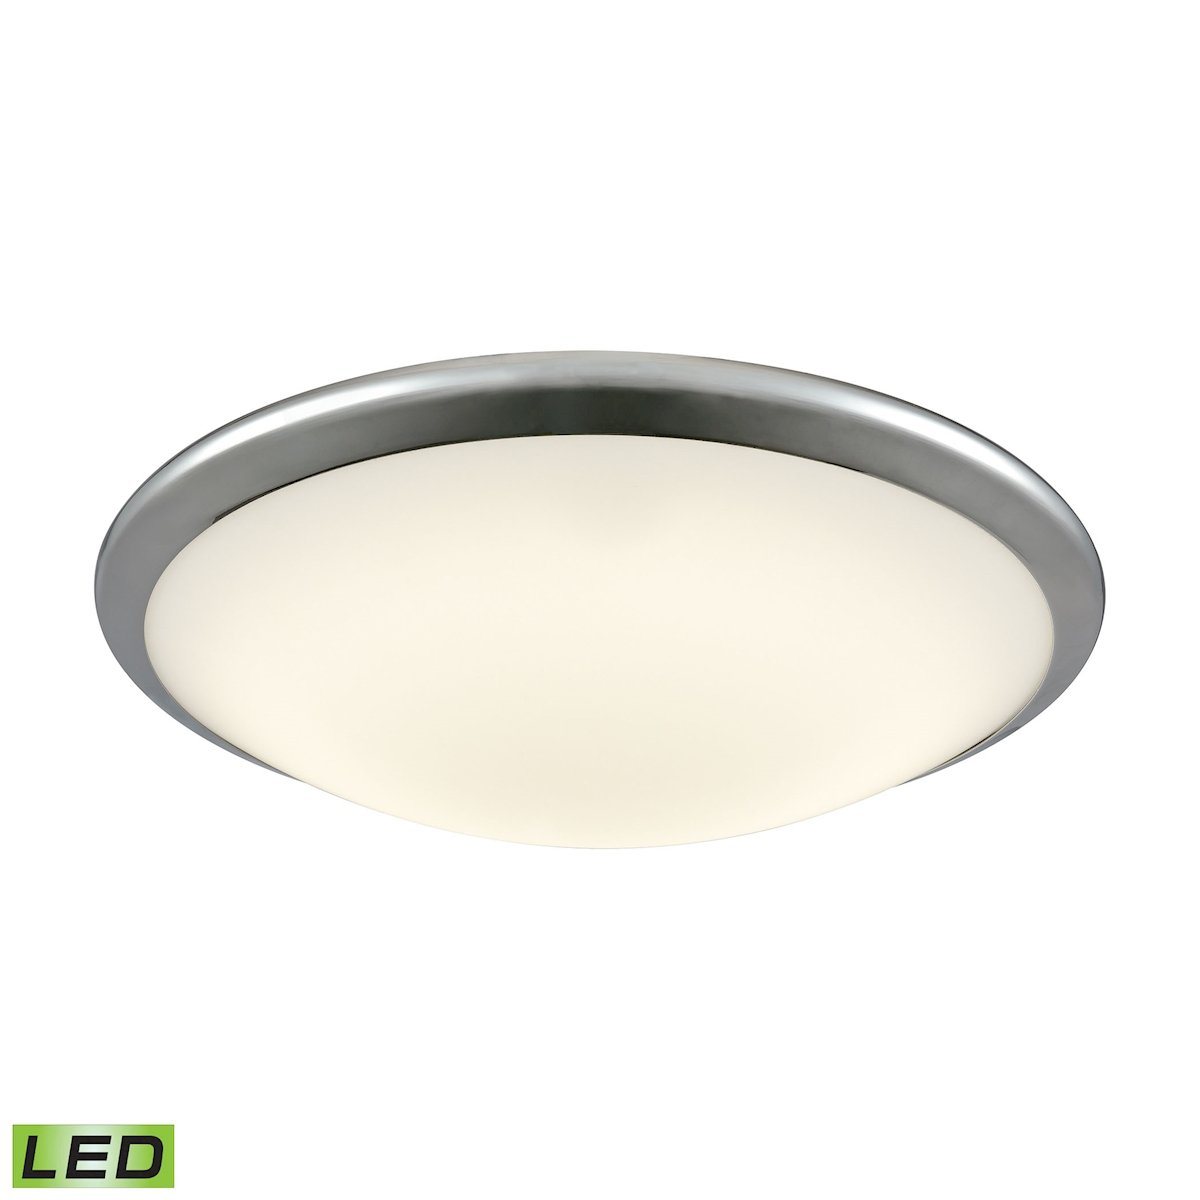 Clancy Round LED Flushmount In Chrome And Opal Glass - Large Flush Mount Elk Lighting 